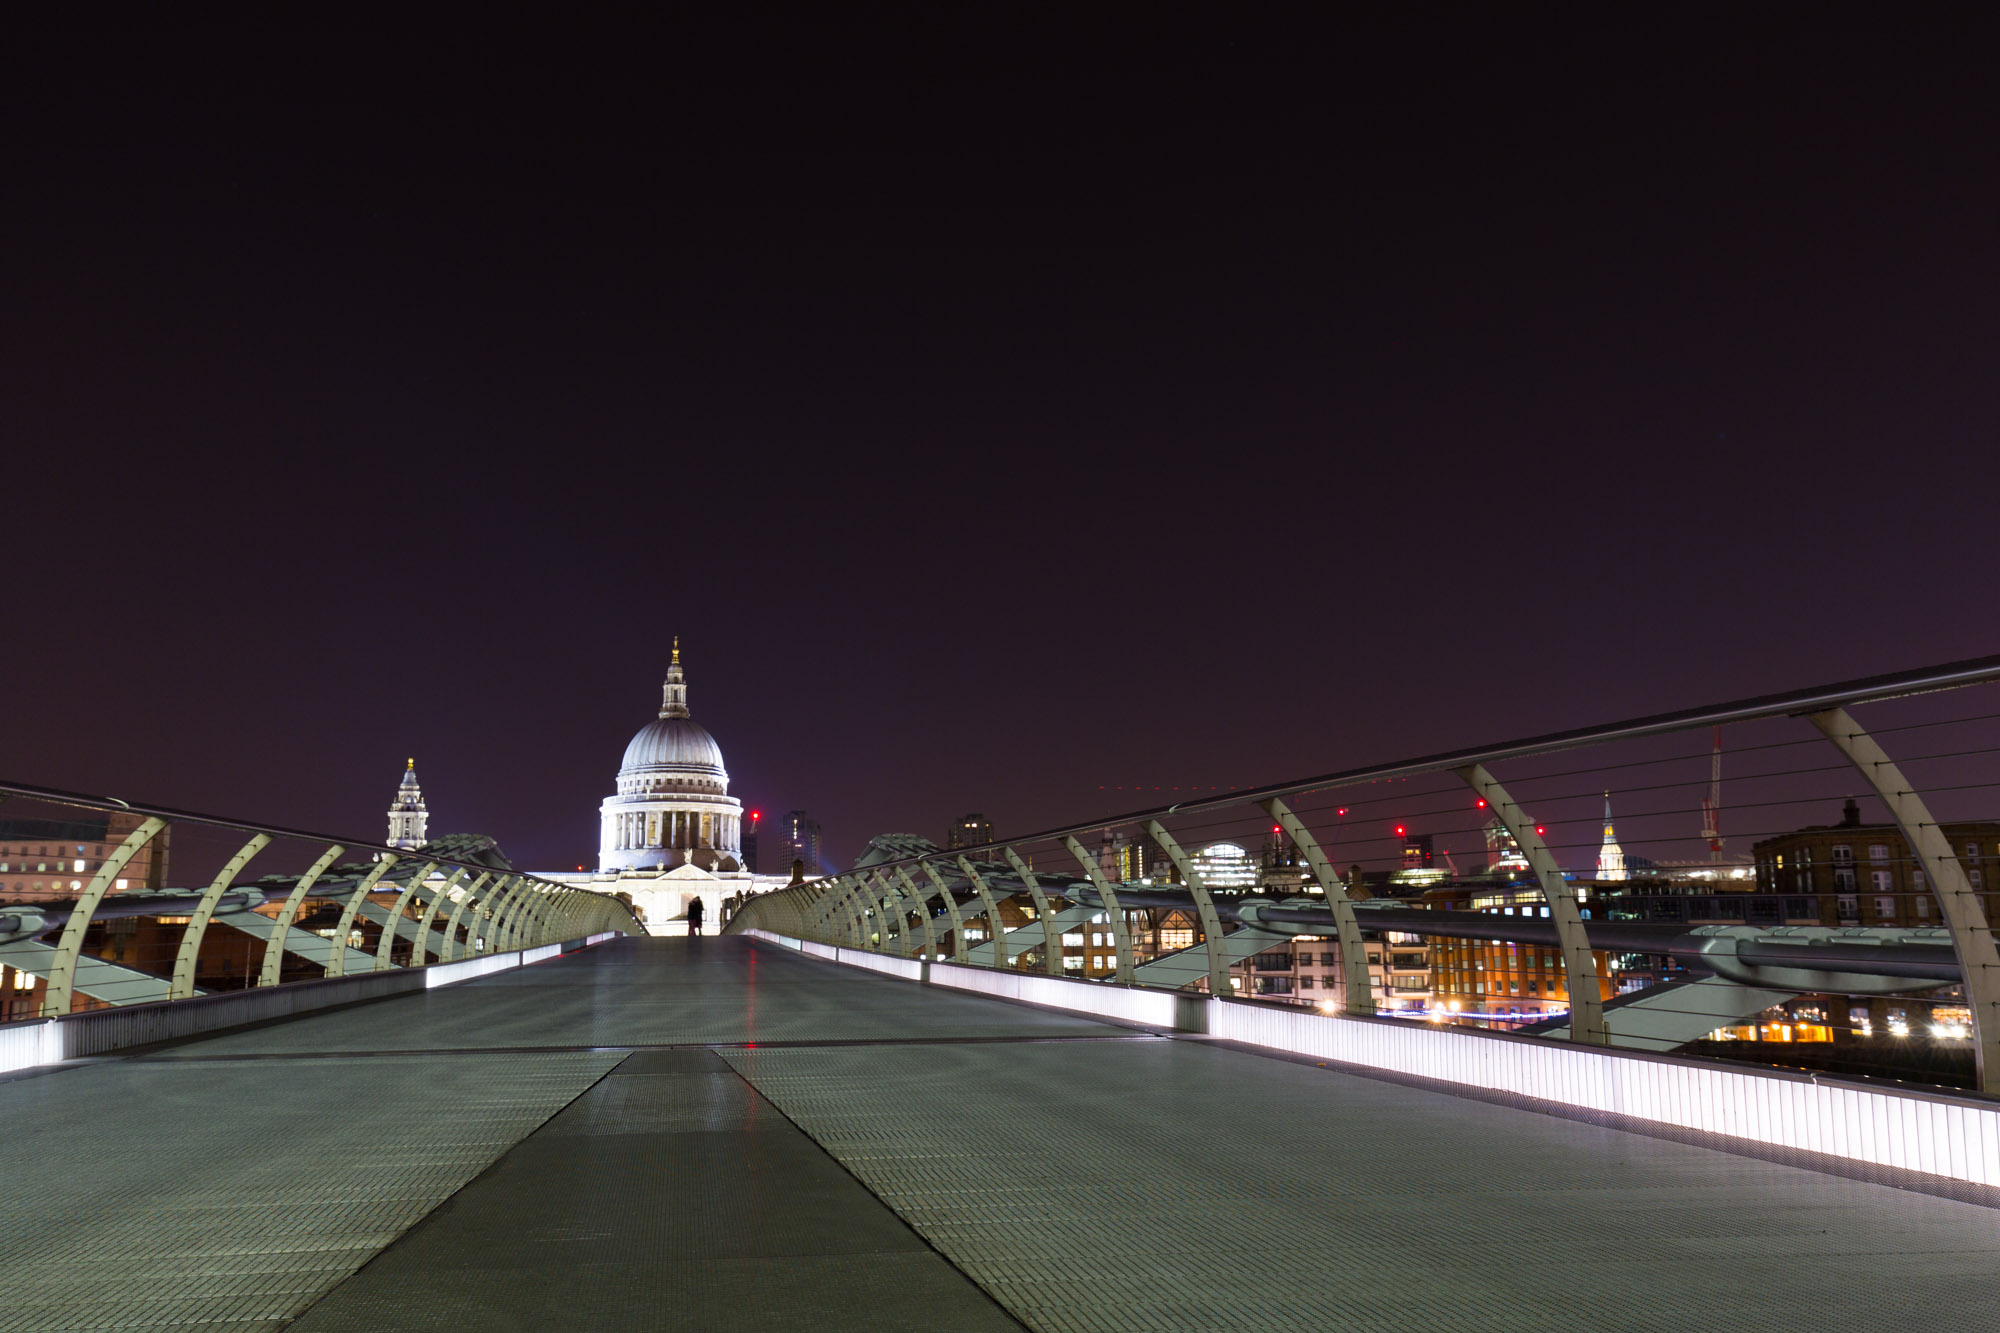 St Pauls Cathedral seen from the Millennium Bridge